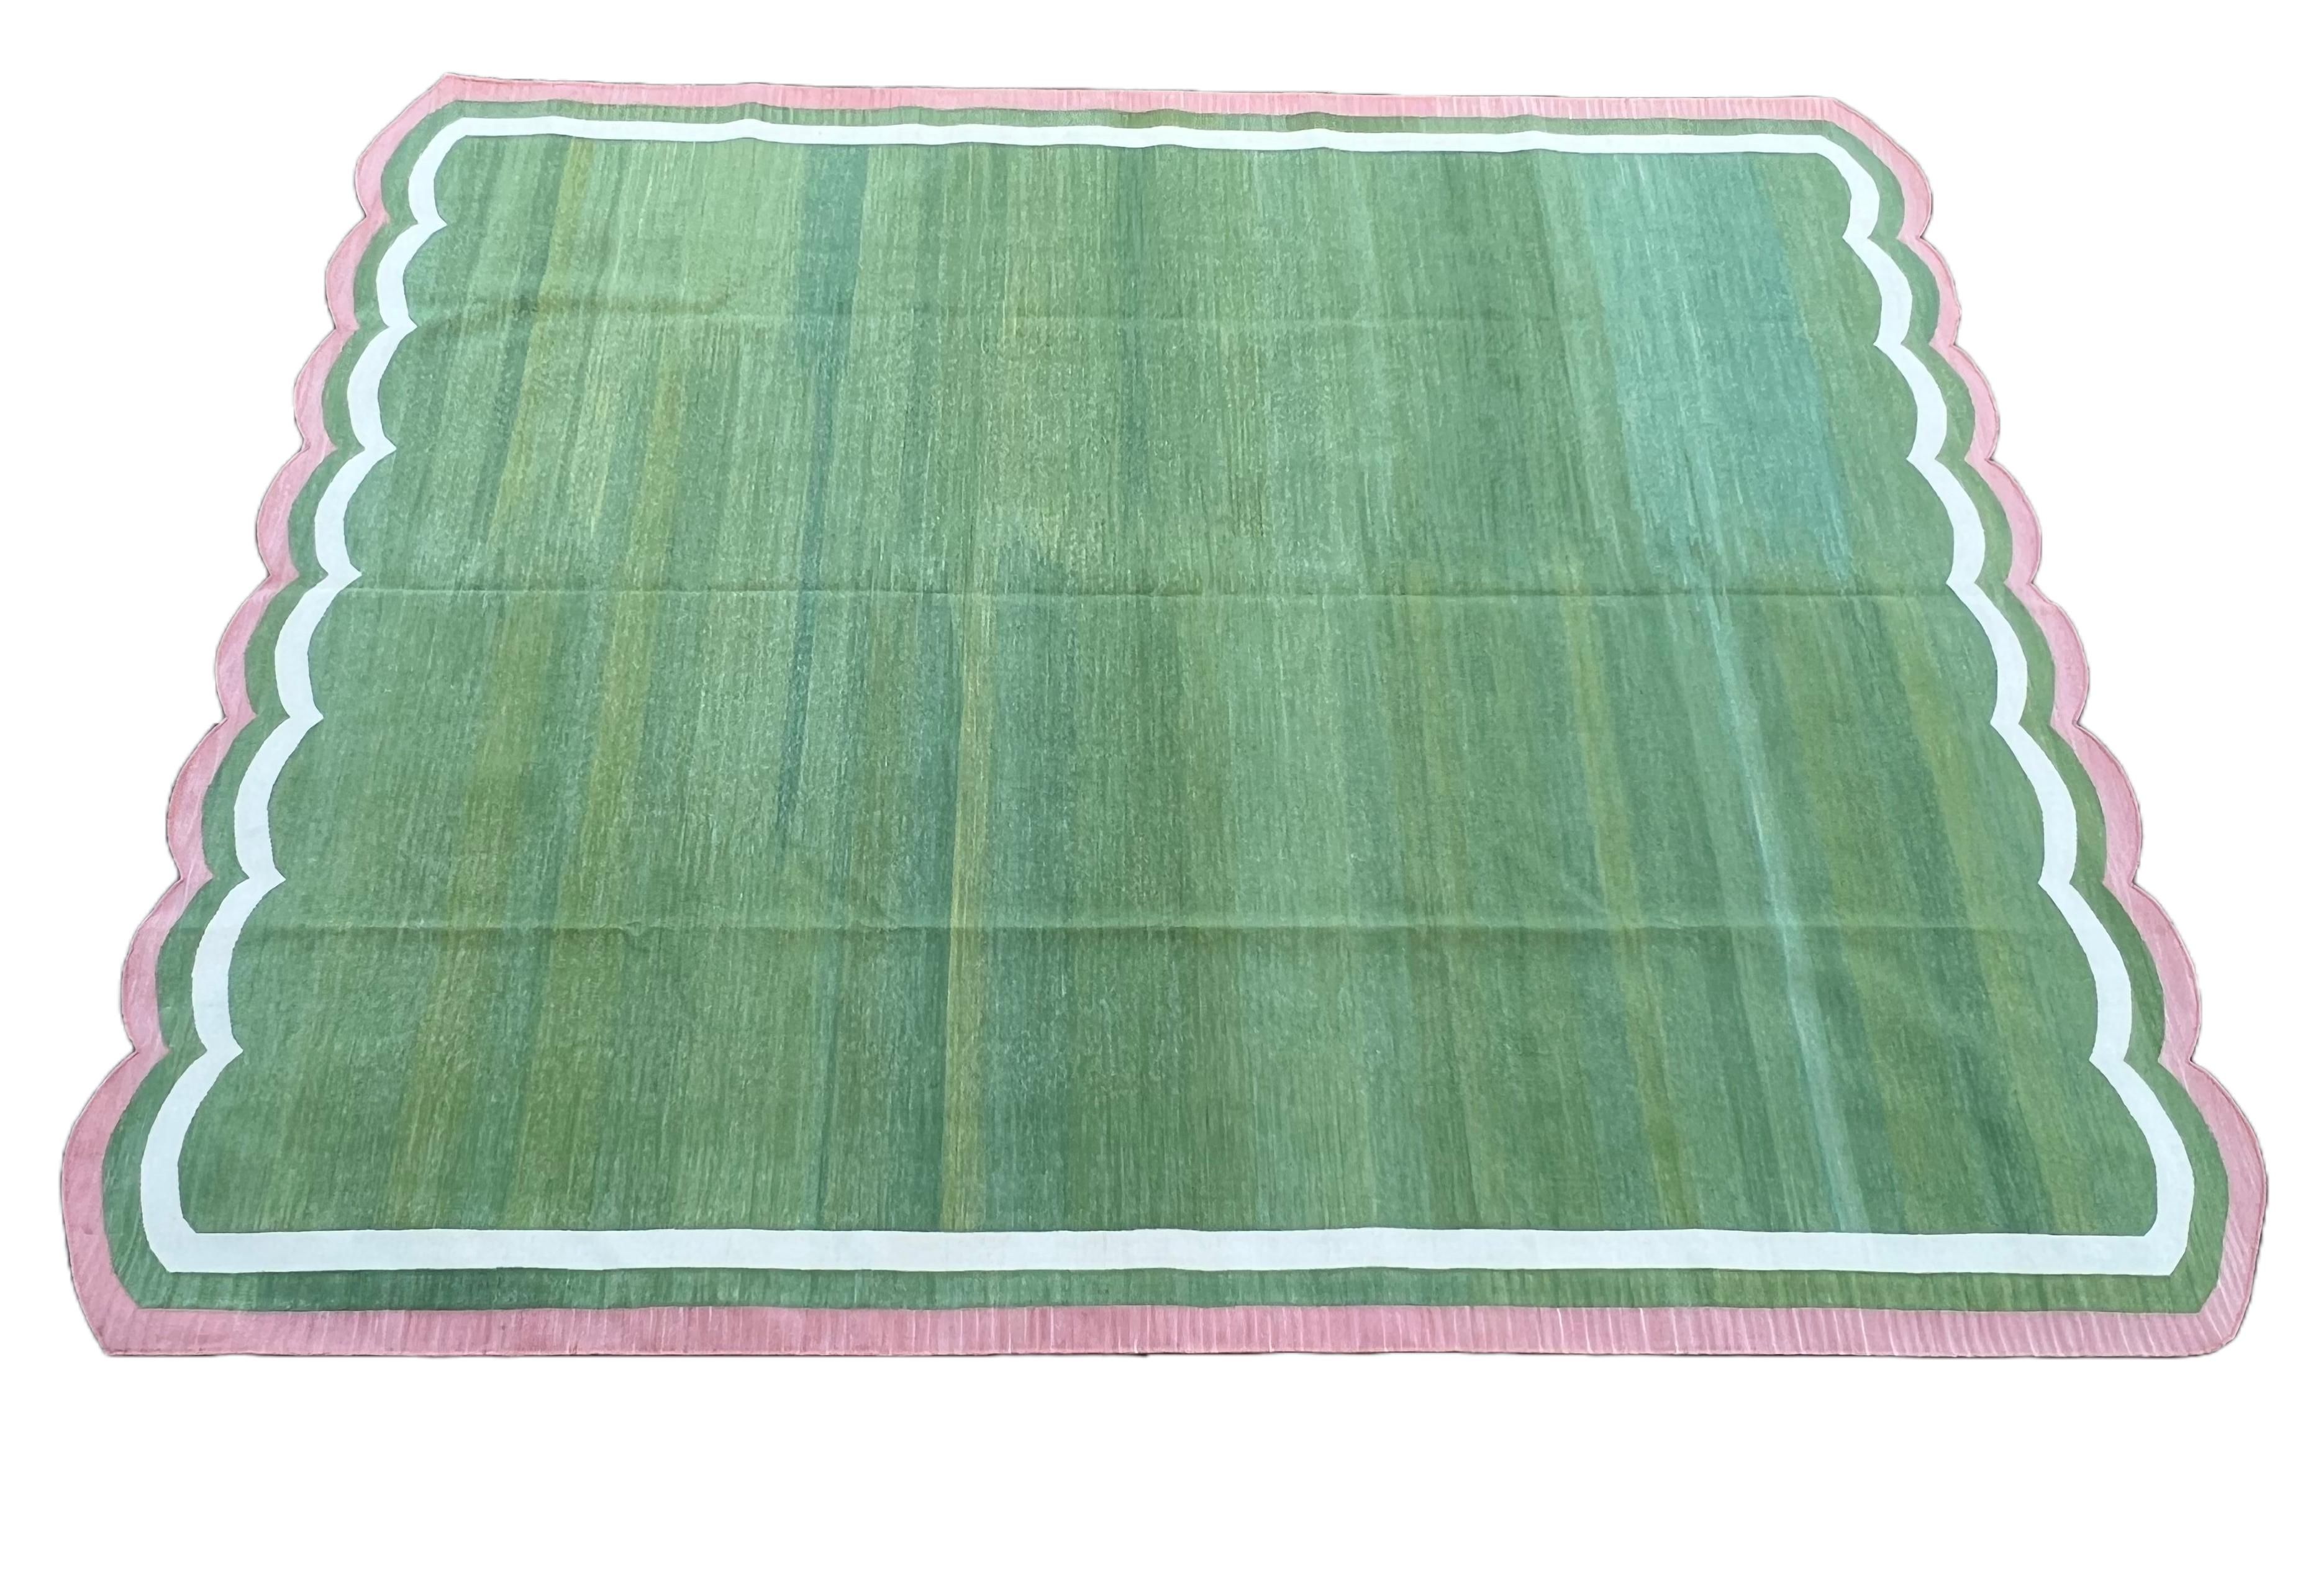 Mid-Century Modern Handmade Cotton Area Flat Weave Rug, 8x10 Green And Pink Scallop Striped Dhurrie For Sale